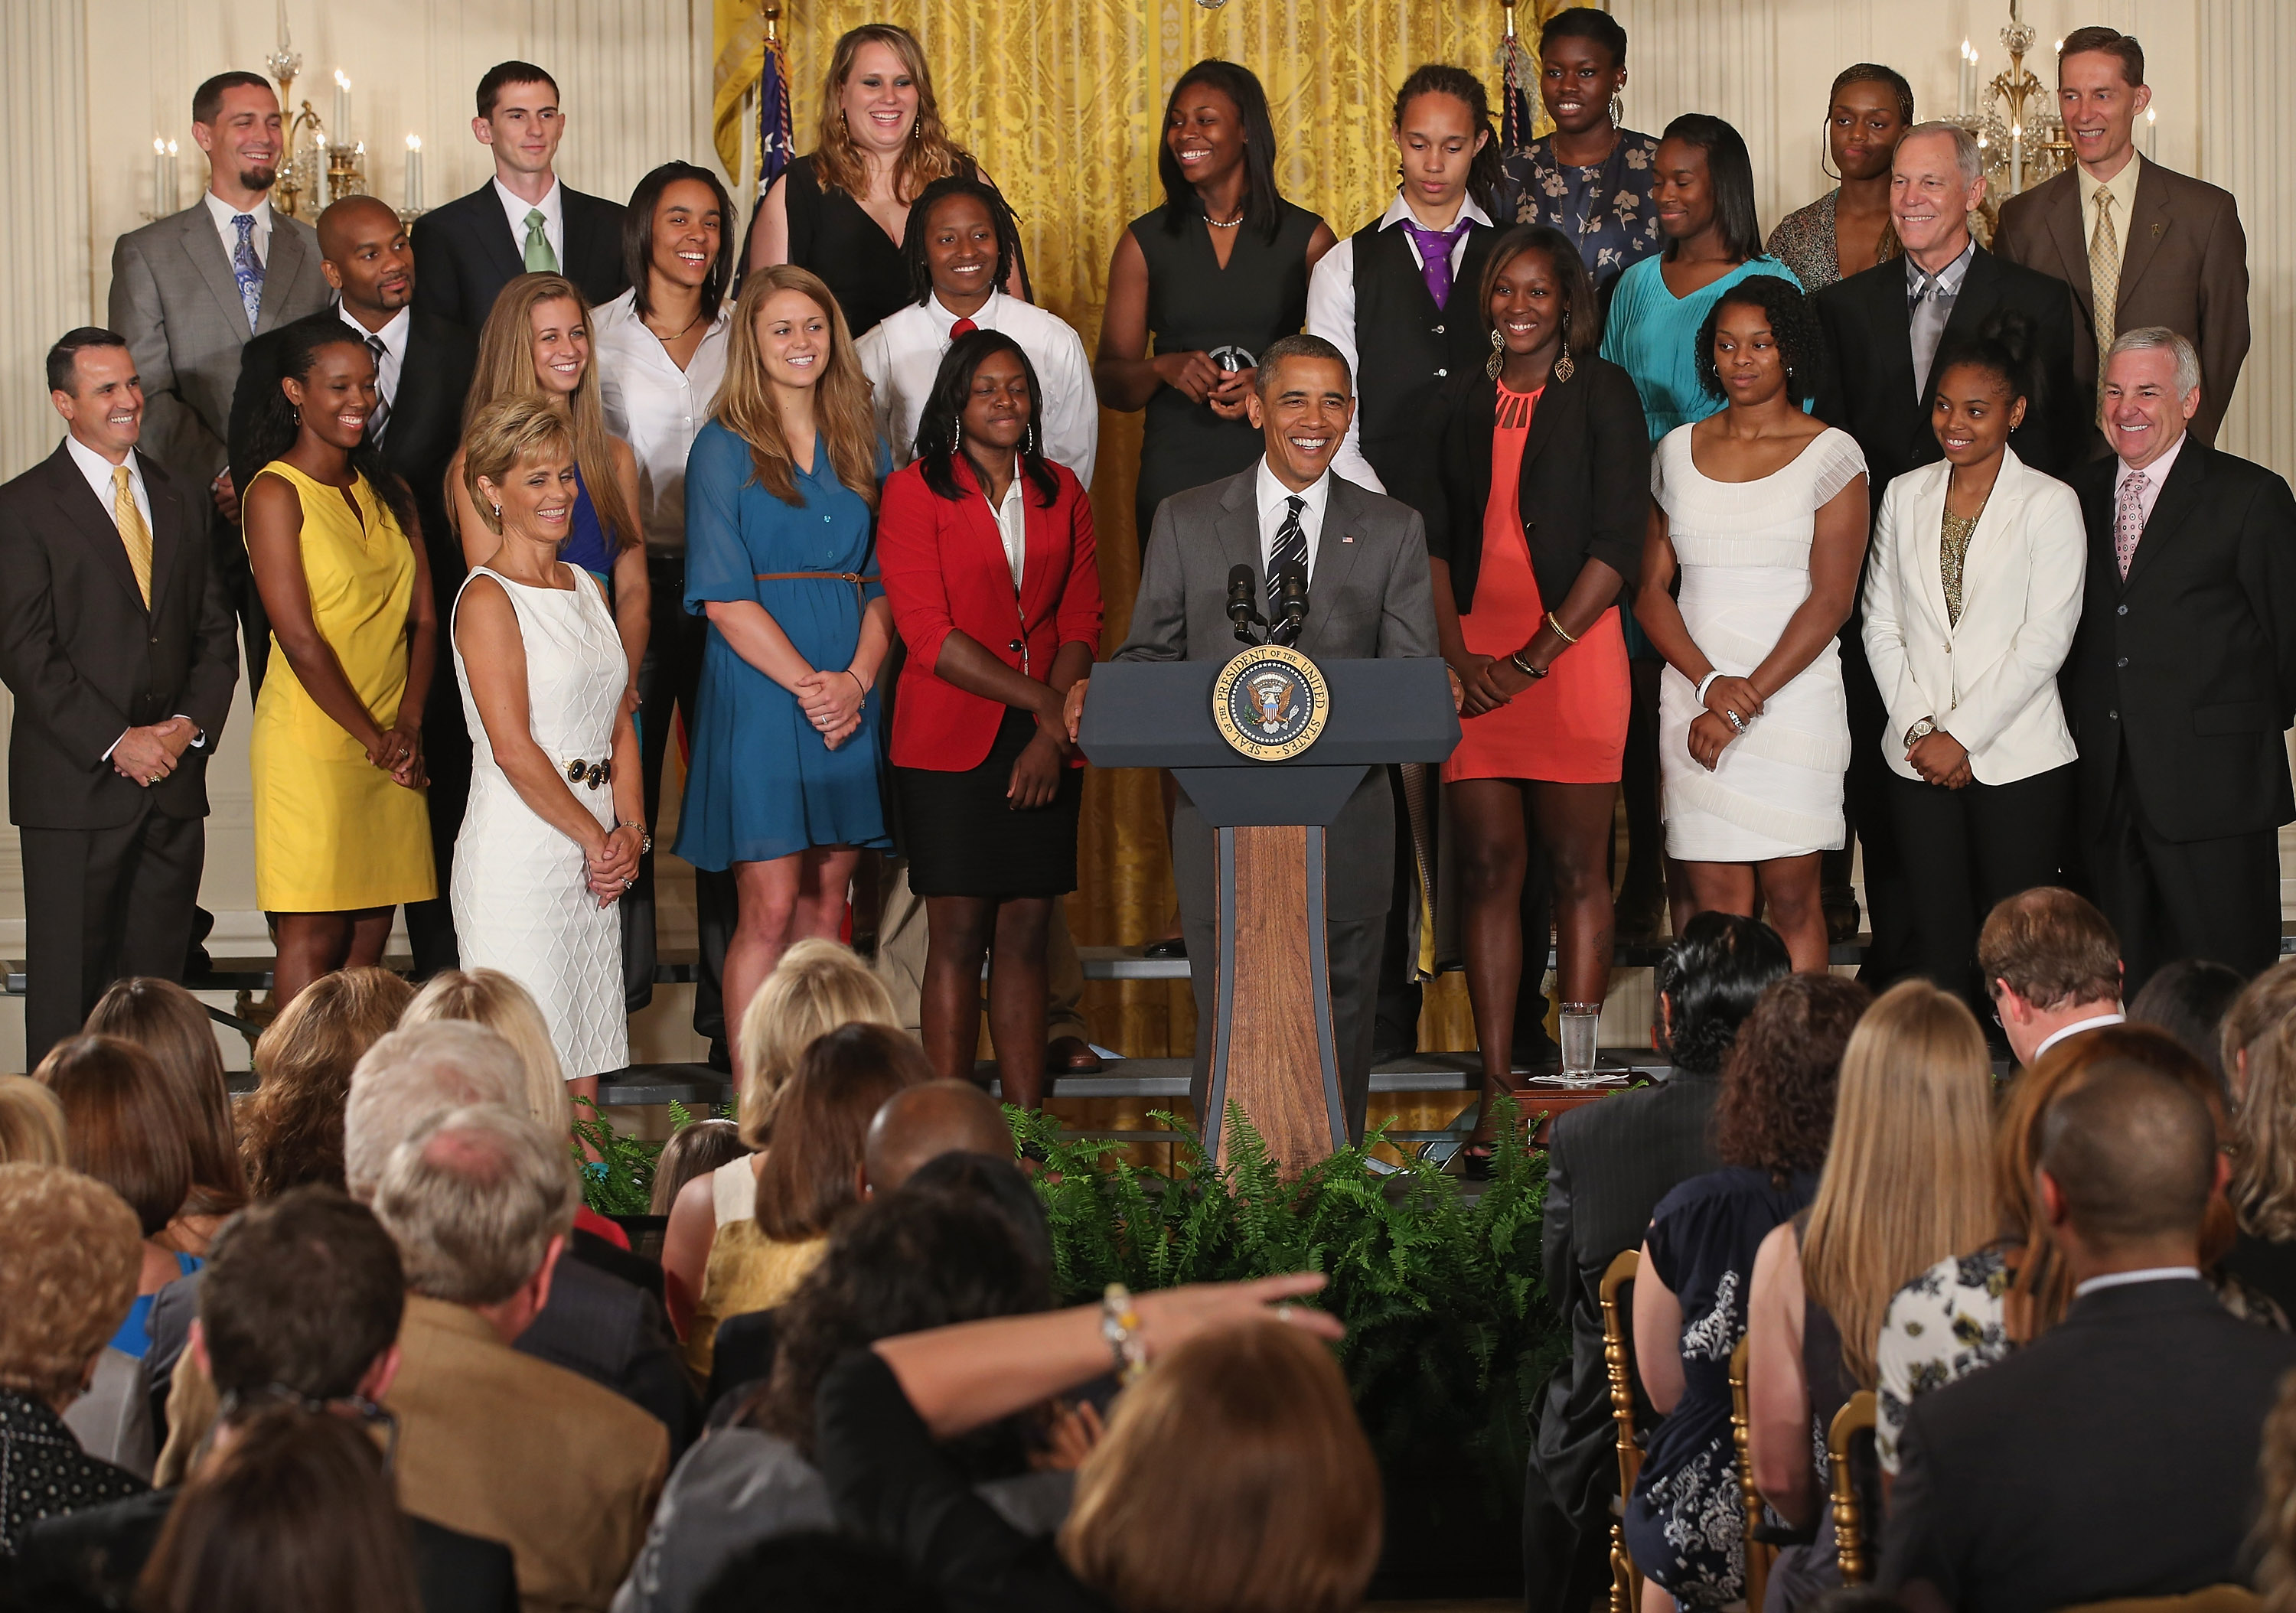 Obama Welcomes 2012 NCAA Women's Basketball Champions To White House